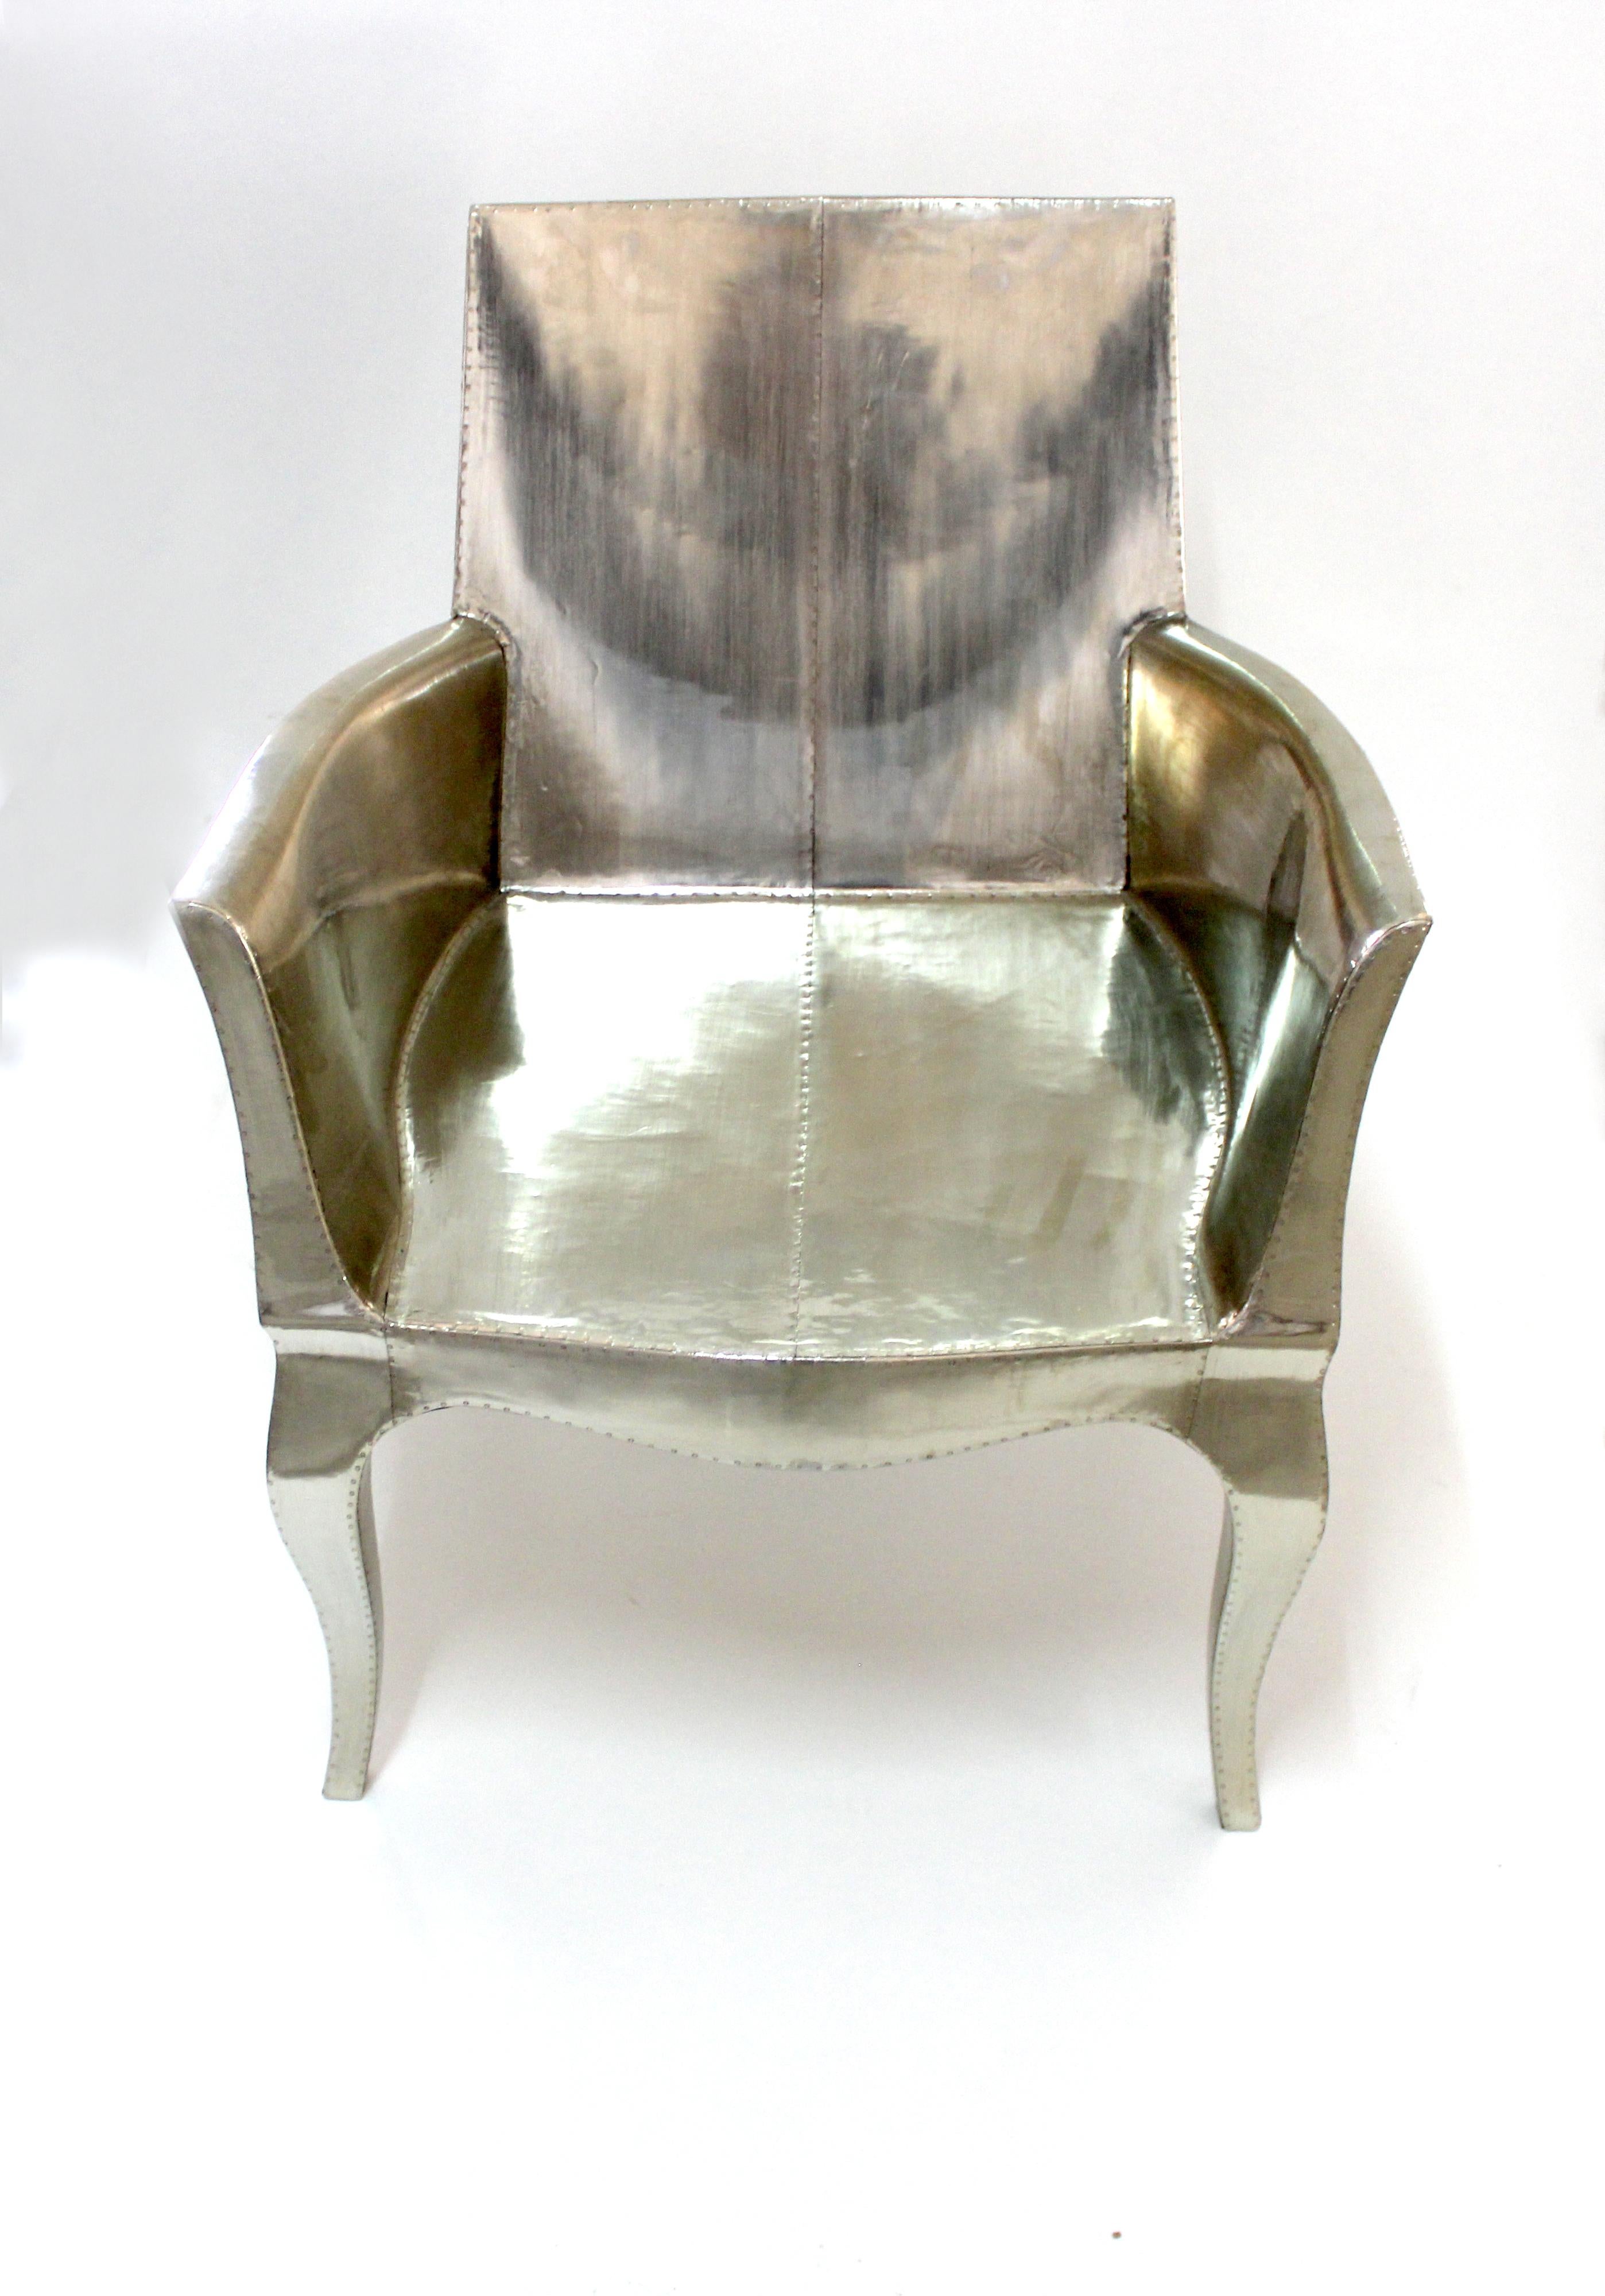 Indian Art Deco Chairs in Smooth White Bronze by Paul Mathieu for S. Odegard For Sale